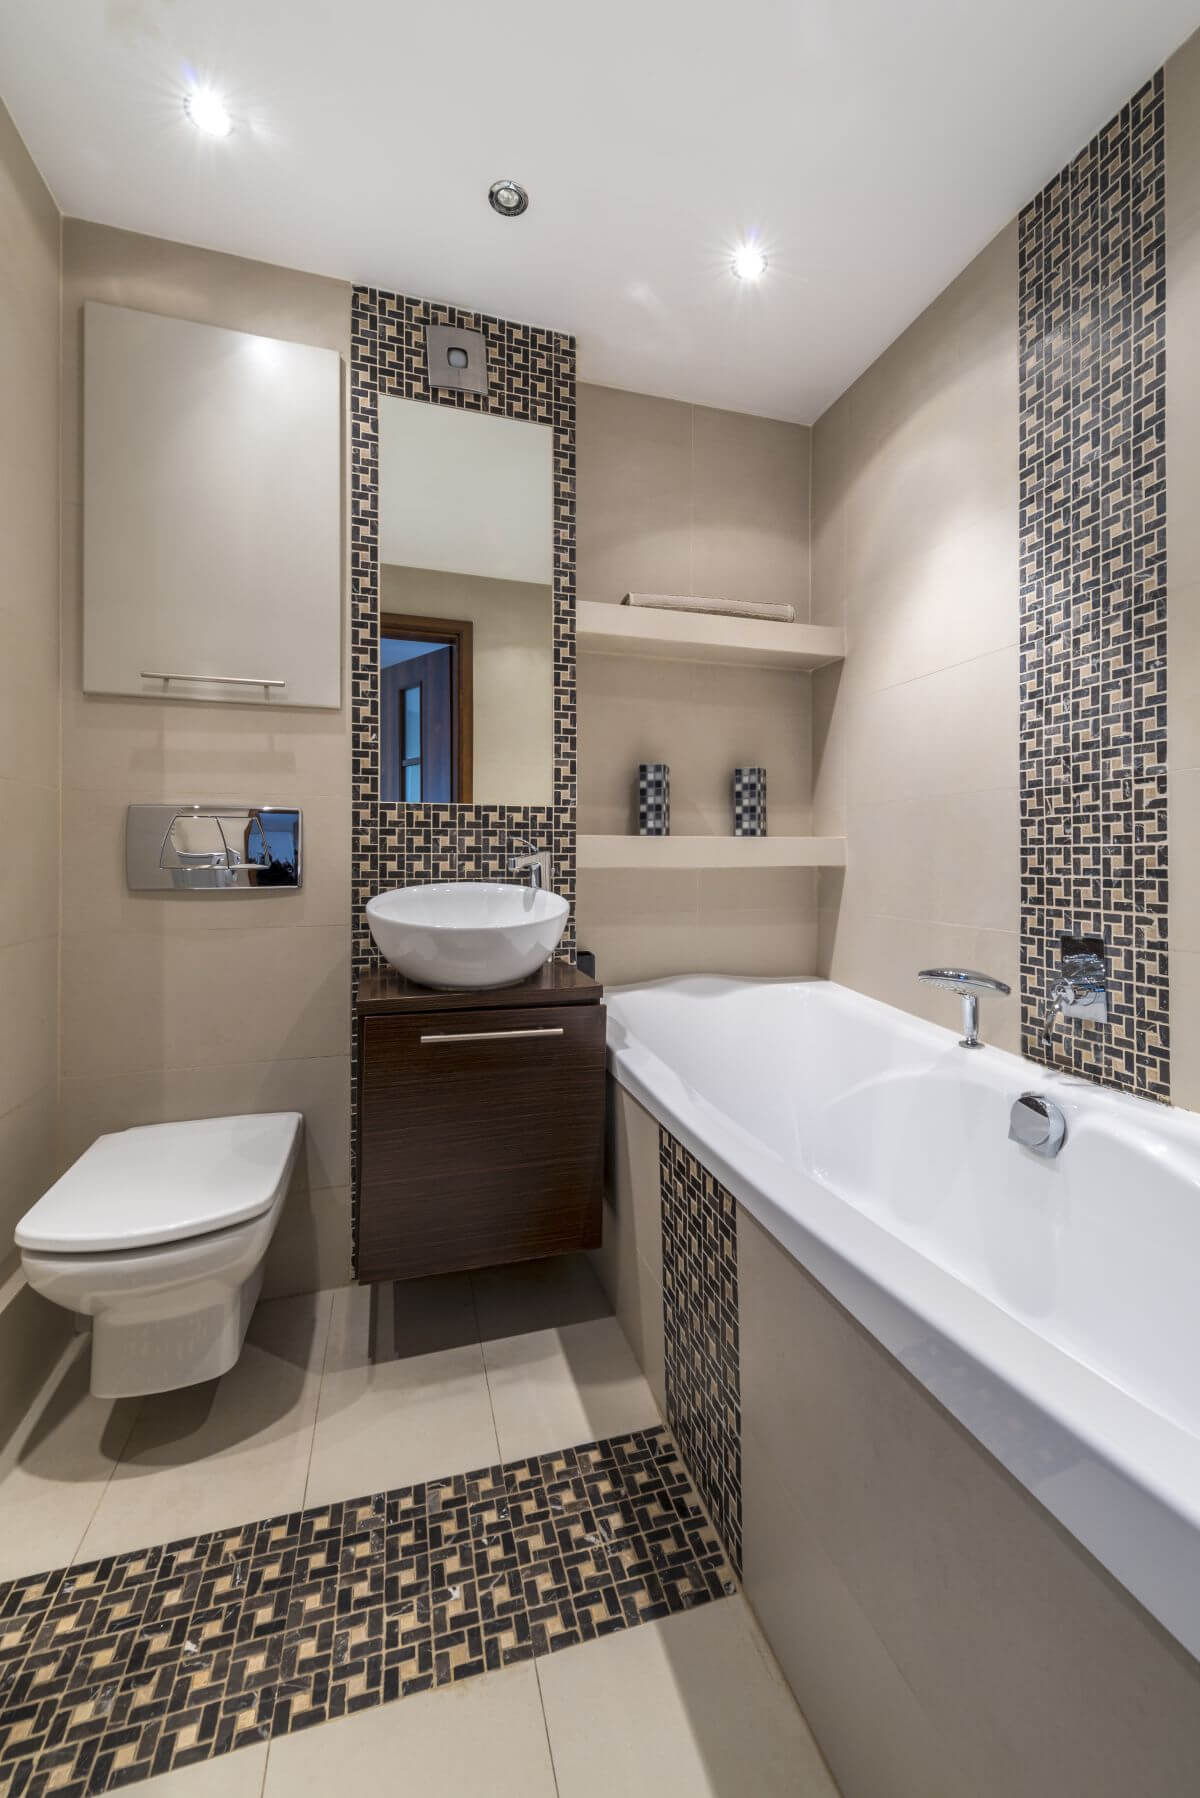 small bathrooms designs minimalist design with repeated tile patterns LUJHSPZ